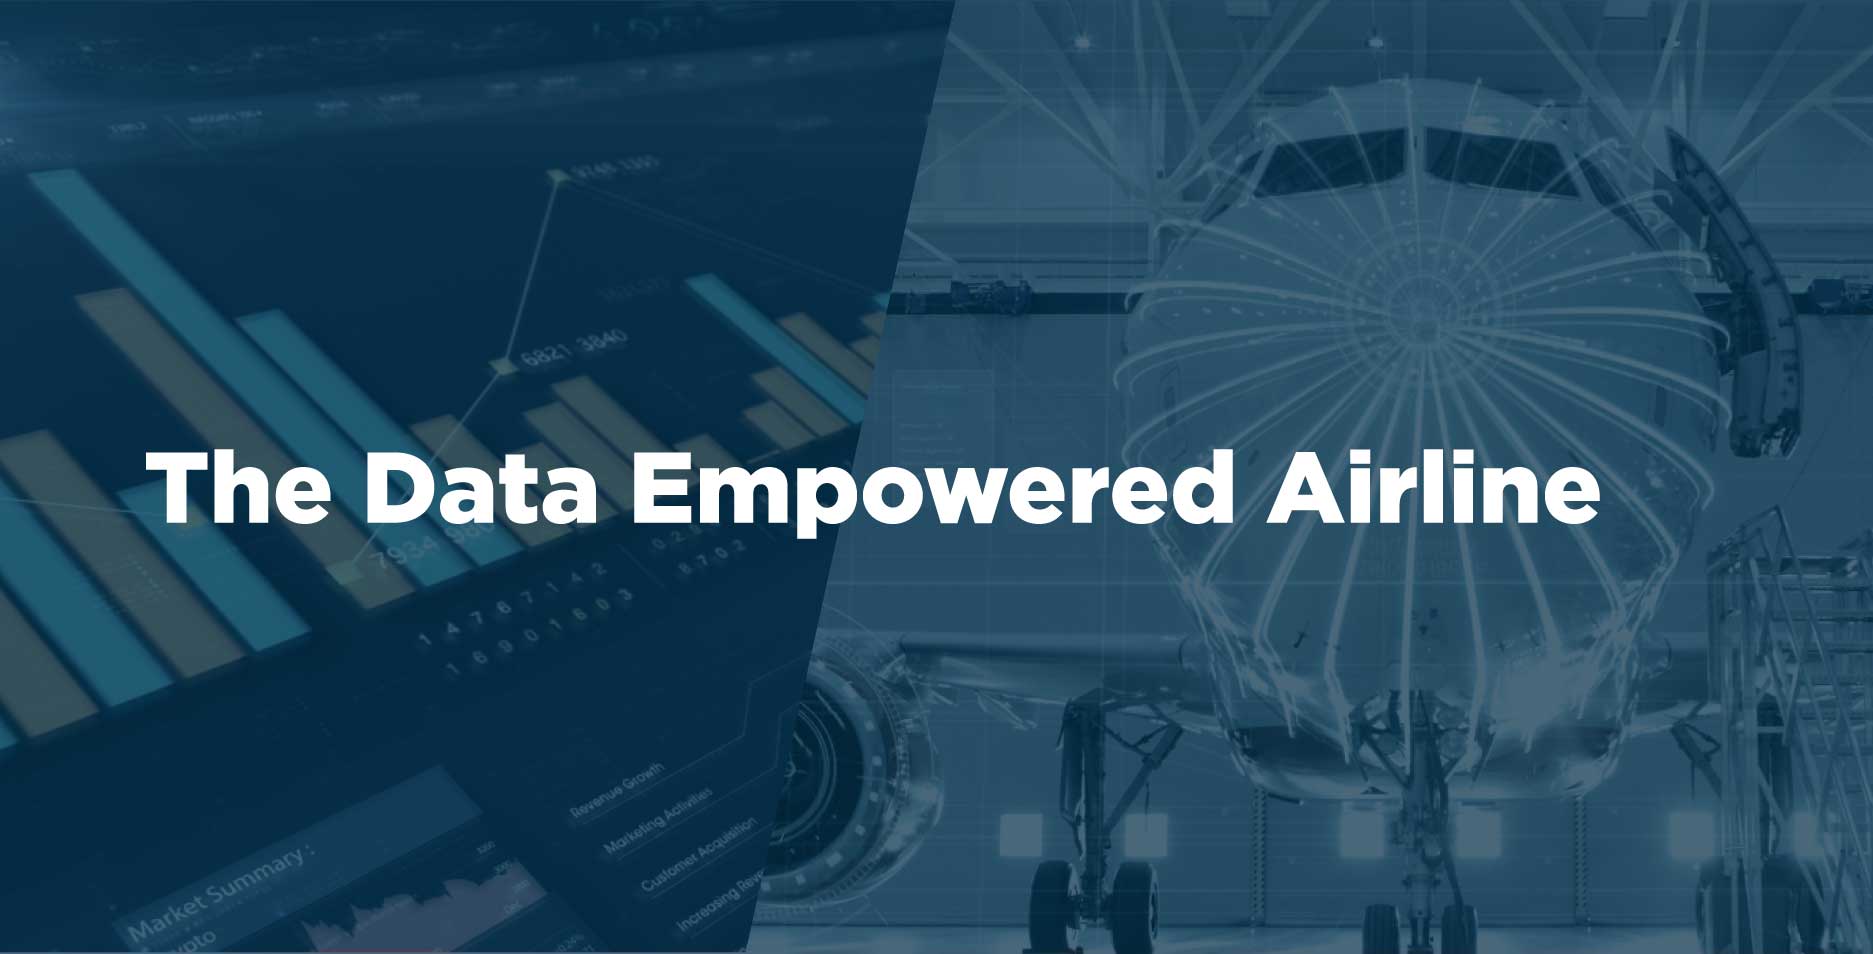 The Data Empowered Airline